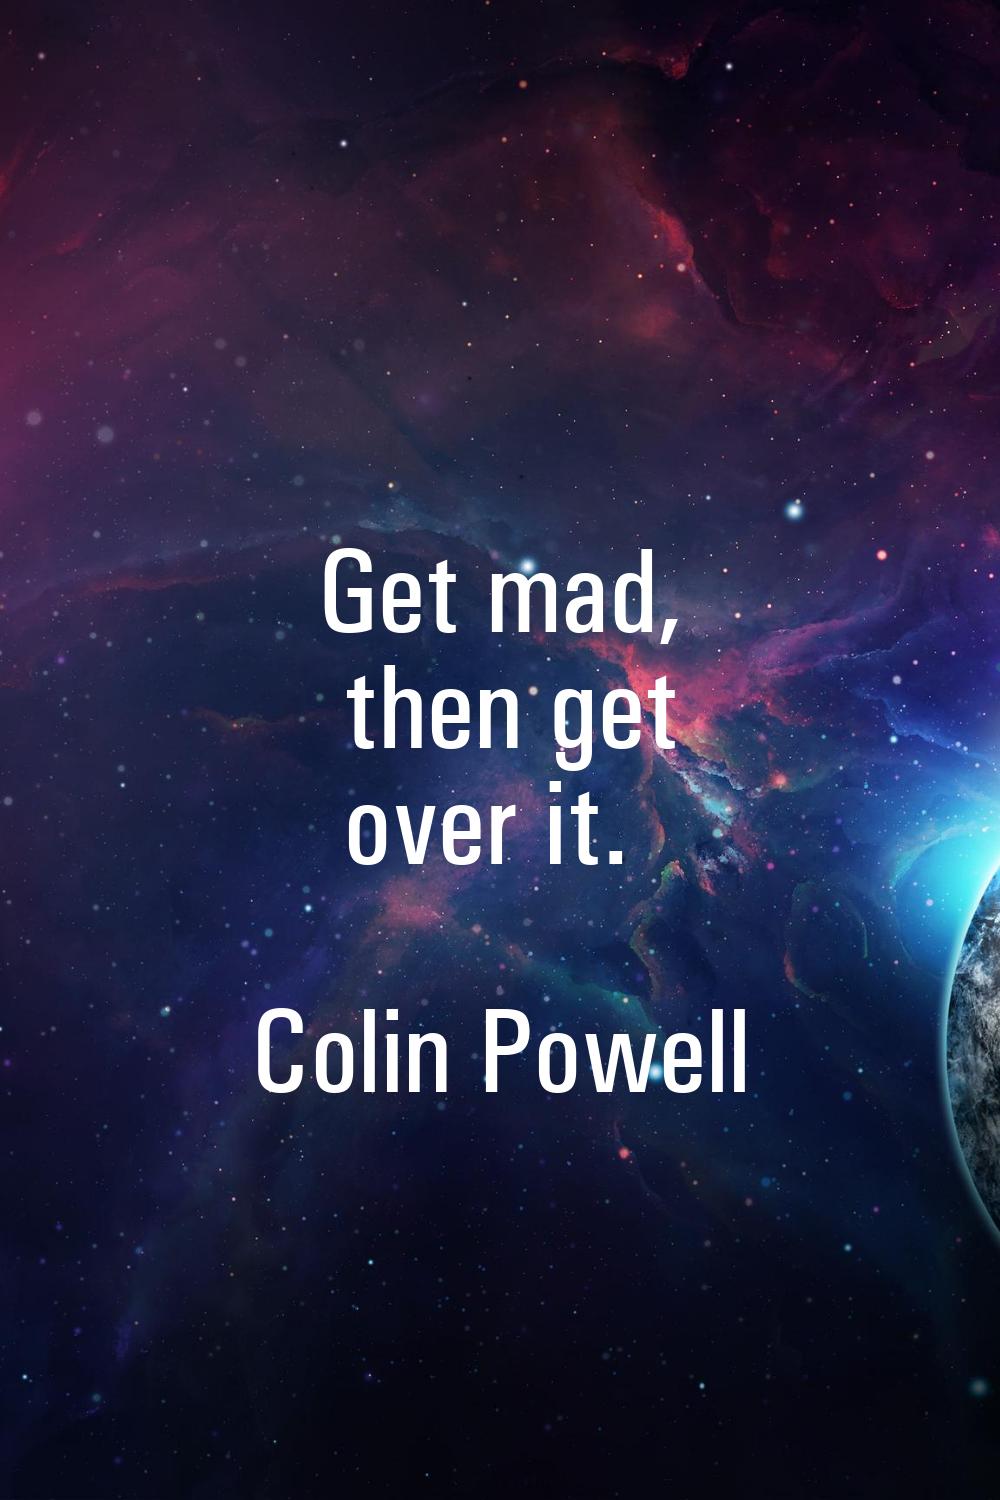 Get mad, then get over it.